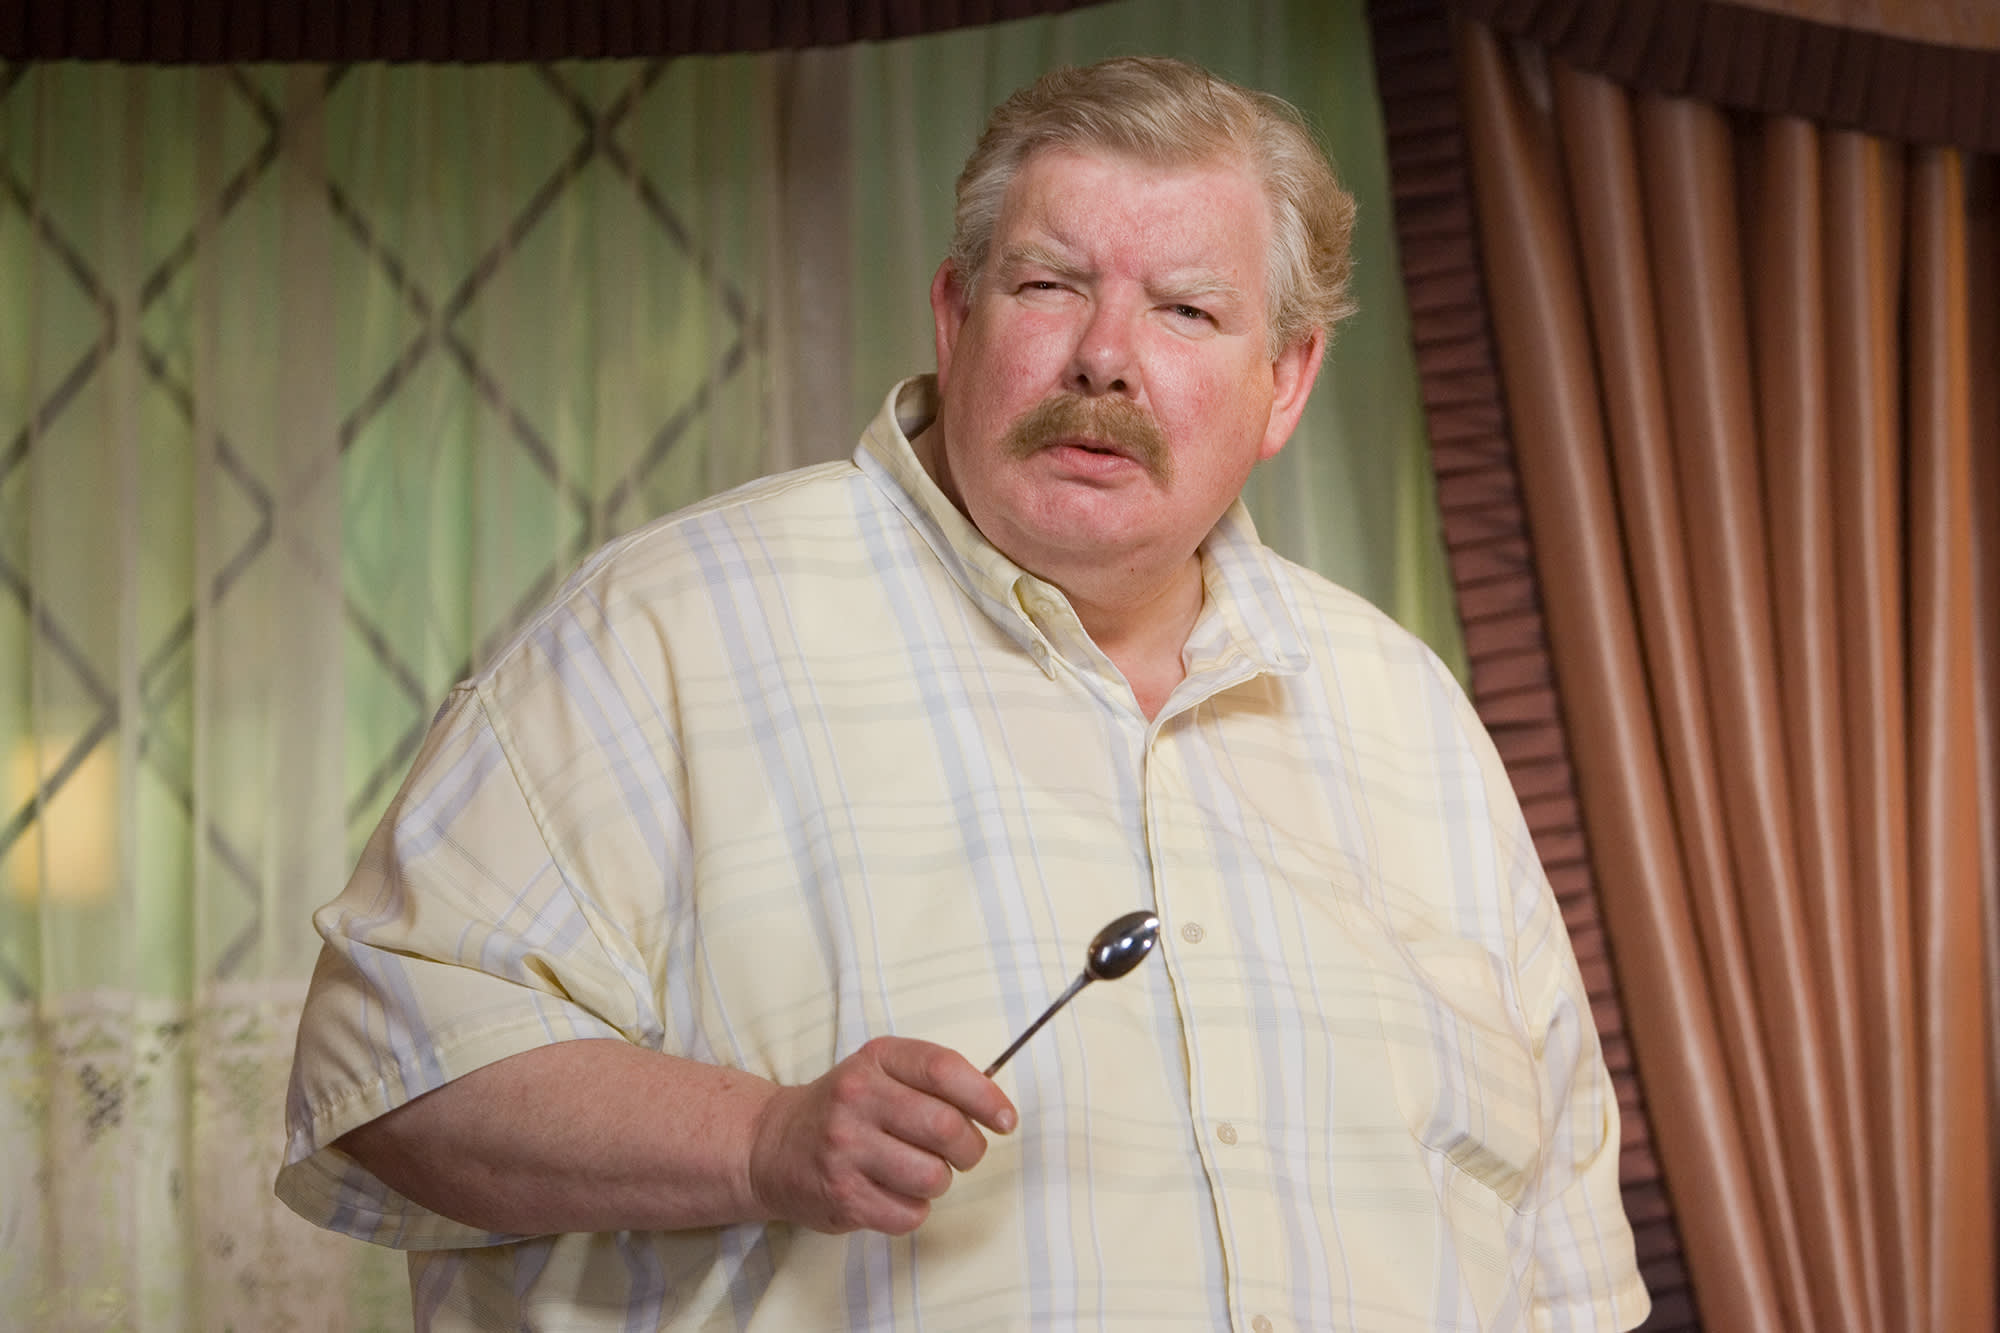 Vernon Dursley stood in the living room of Privet Drive holding a spoon and looking confused.